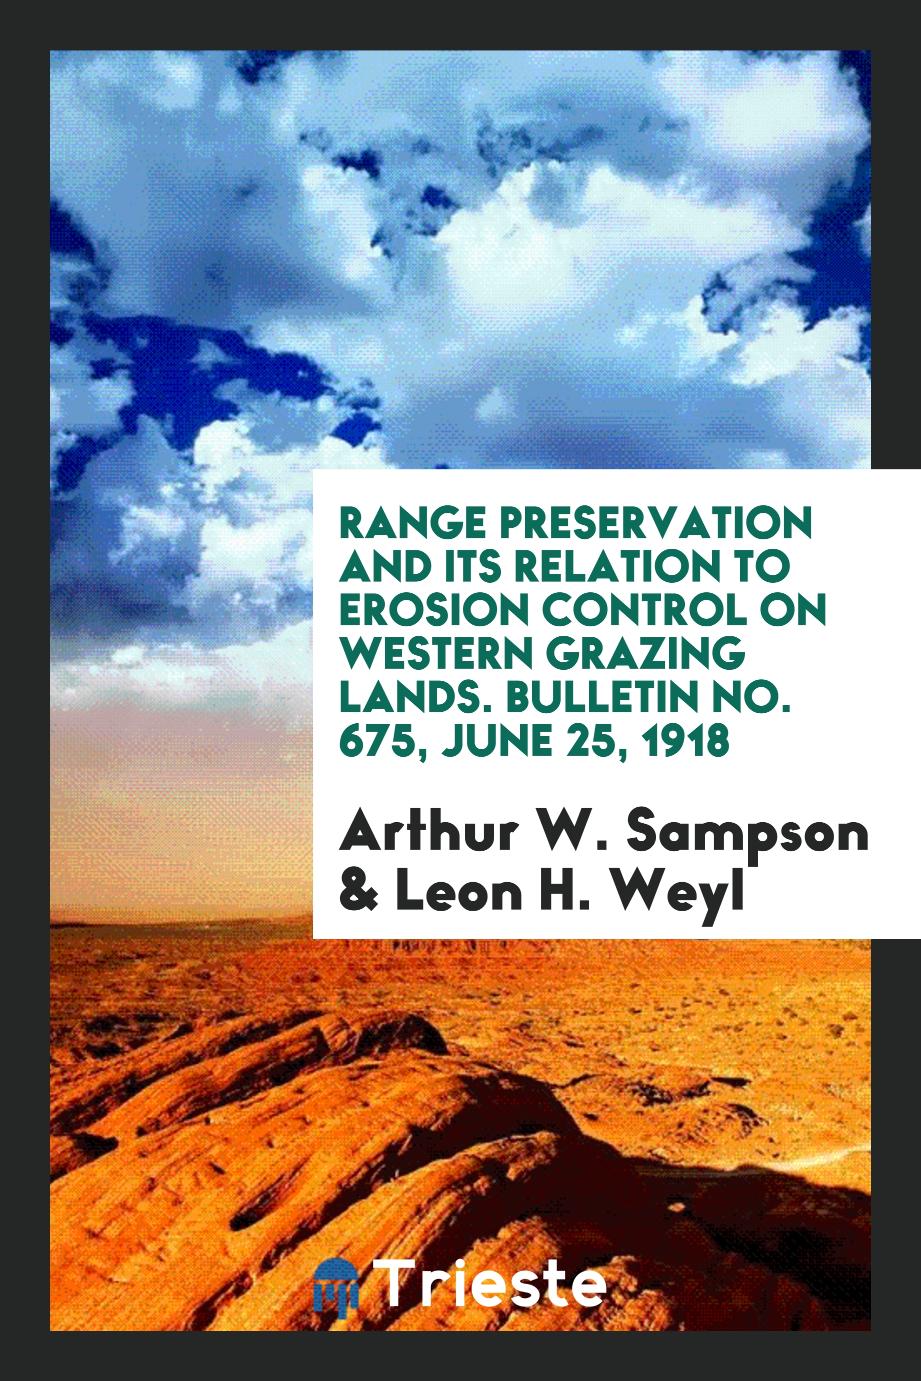 Range preservation and its relation to erosion control on western grazing lands. Bulletin No. 675, June 25, 1918